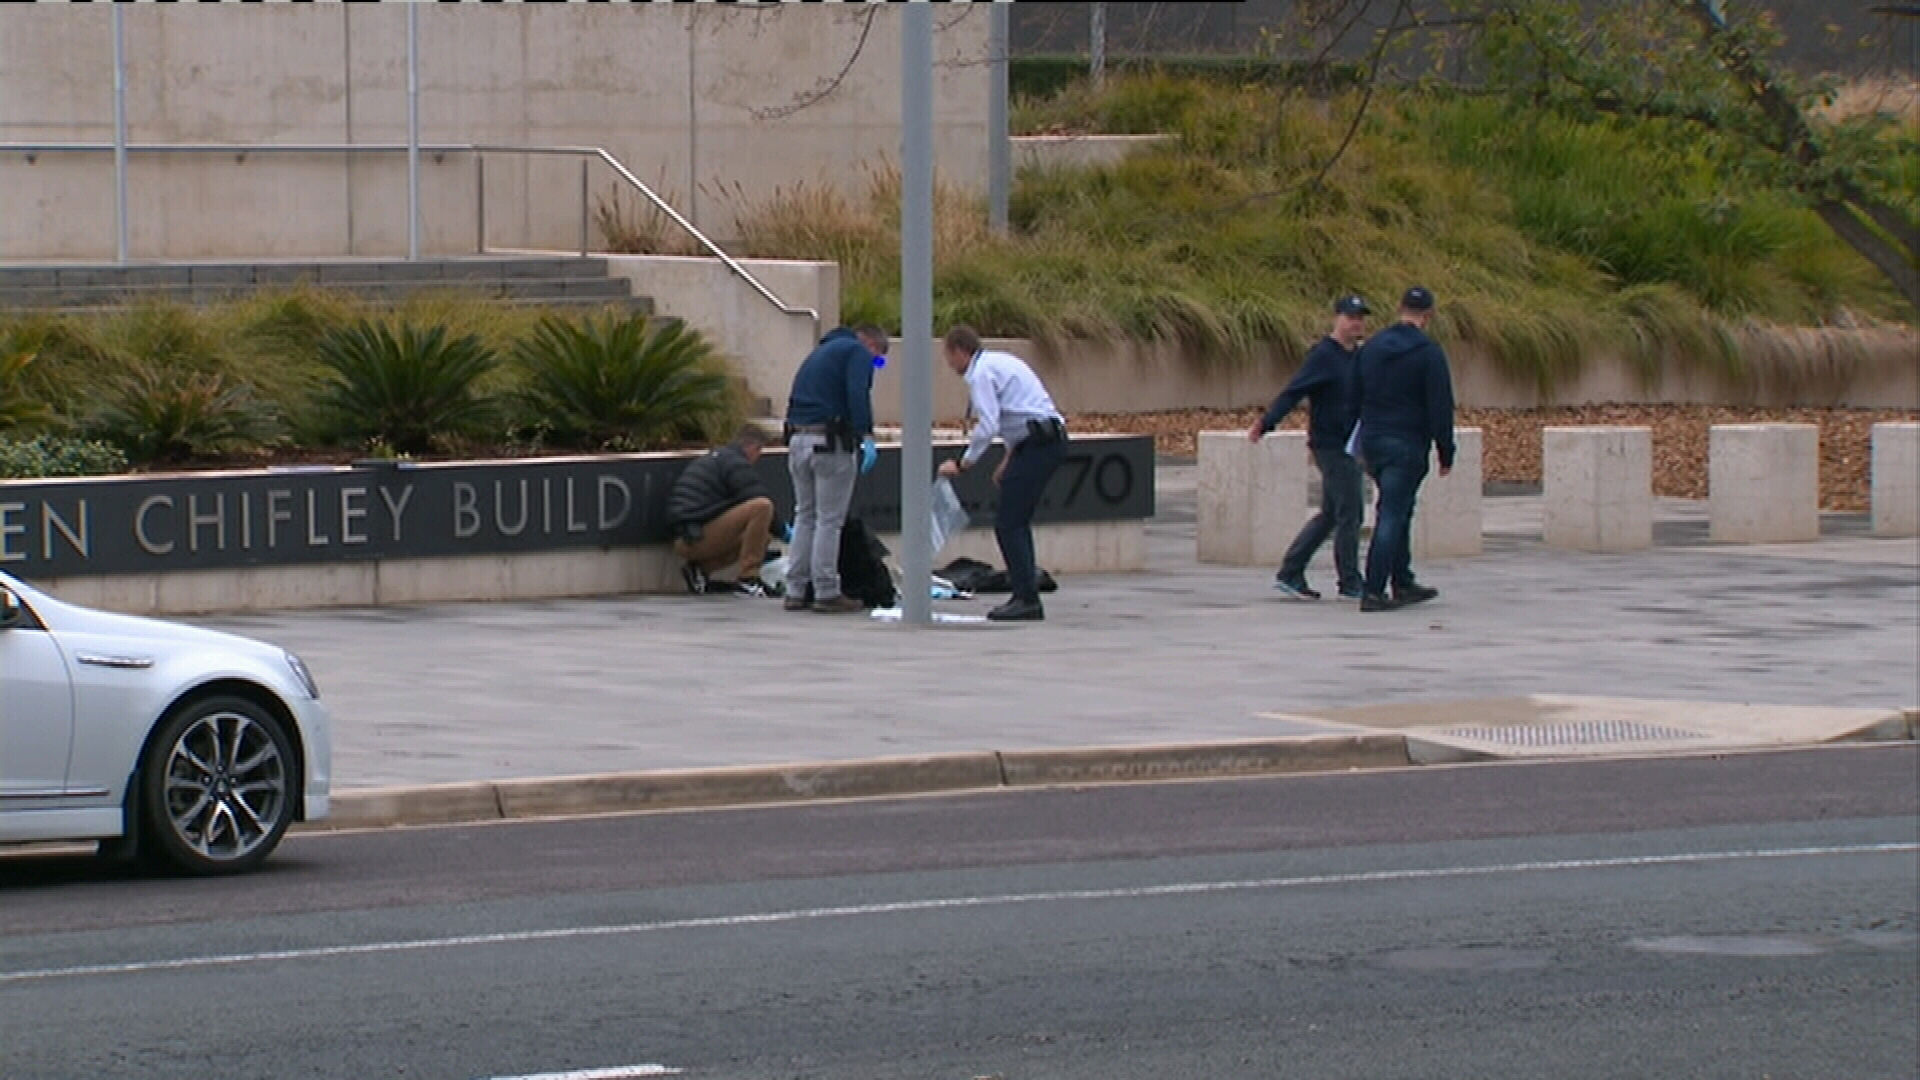 Officers and officials gather at the scene of the incident outside the ASIO building.